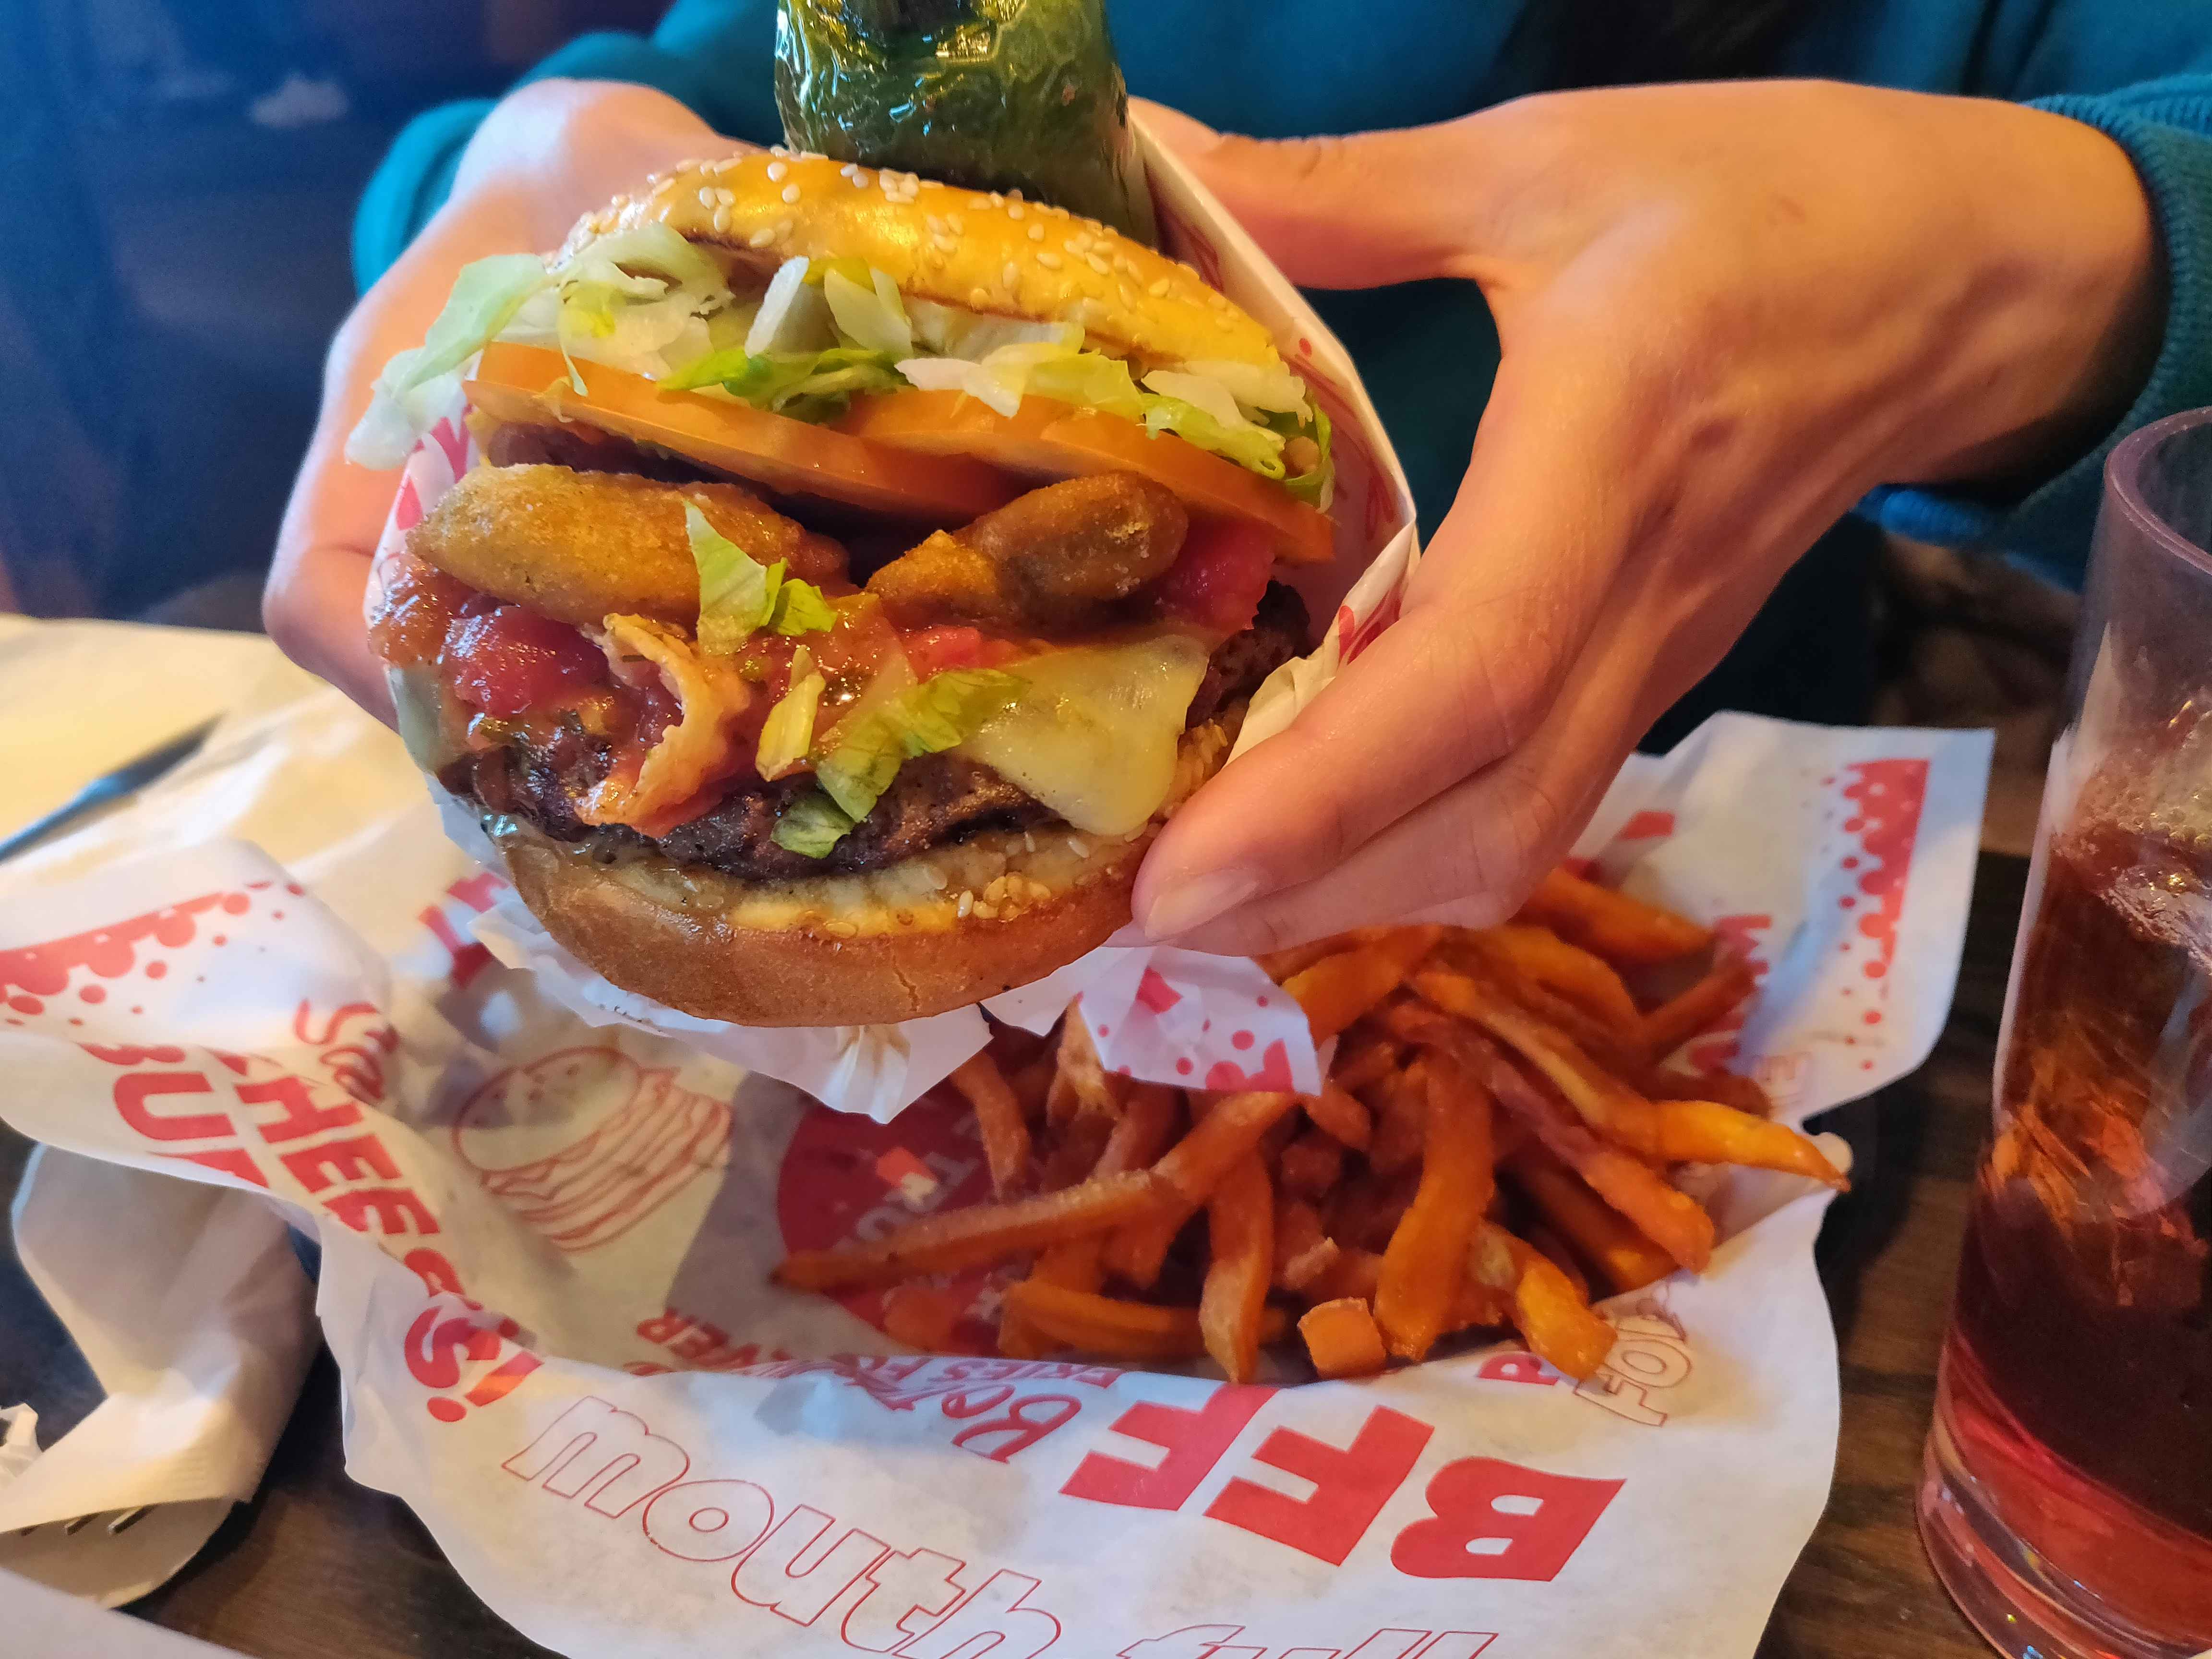 A person's hands holding a very large Jalapeño Burger from Red Robin over a basket with seasoned fries sitting on a table.